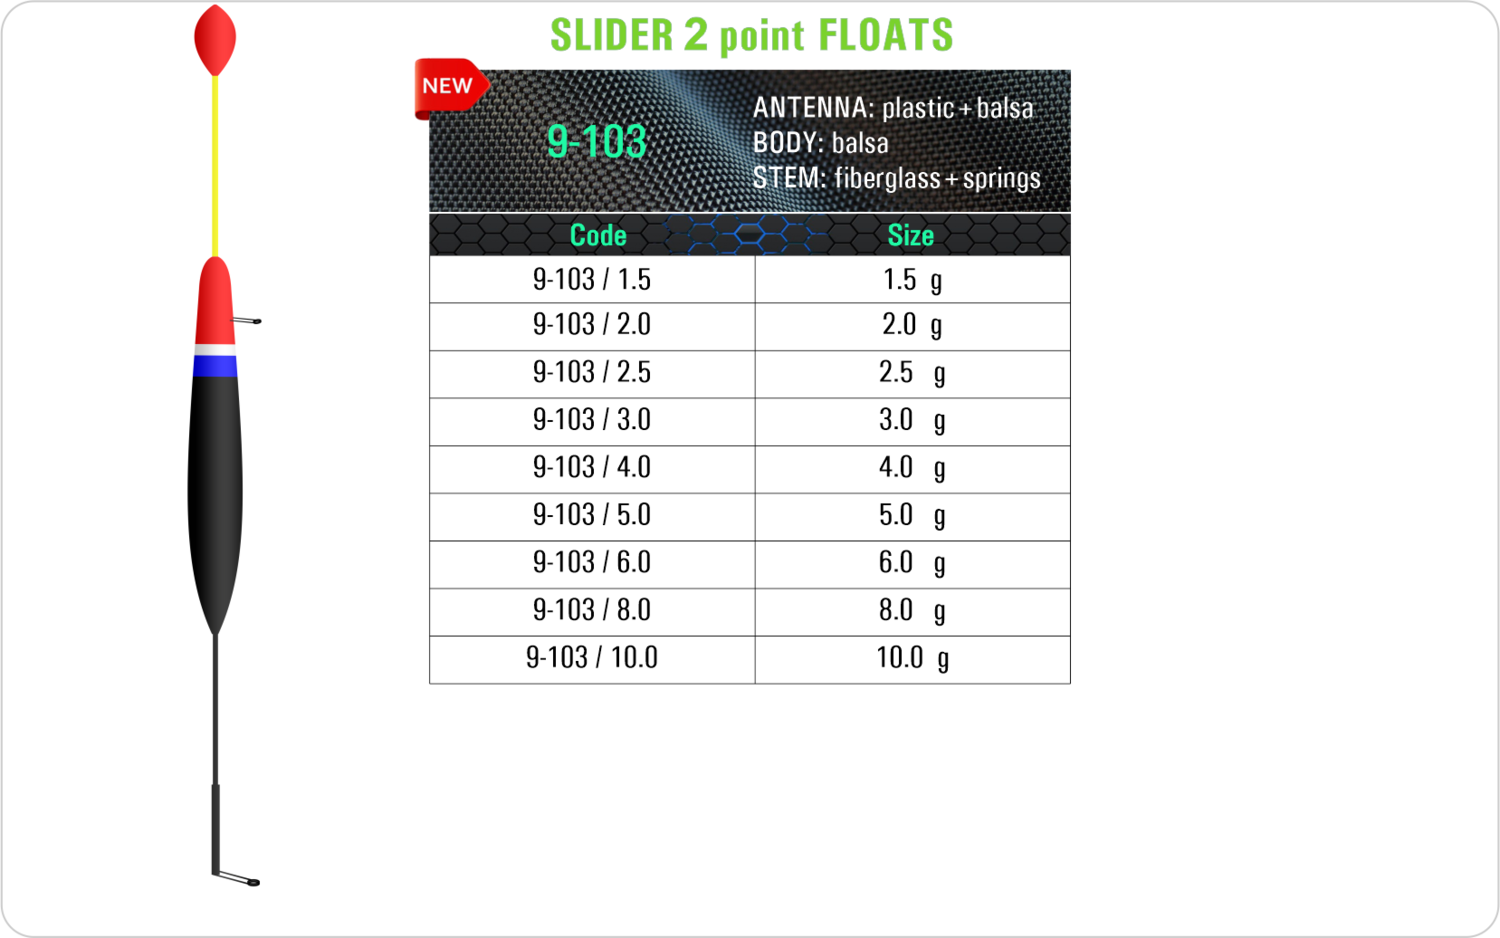 SF 9-103 - Lake and river float model and table containing an additional information about this float with different codes, sizes, types of the body, the stem and the antenna of the float.